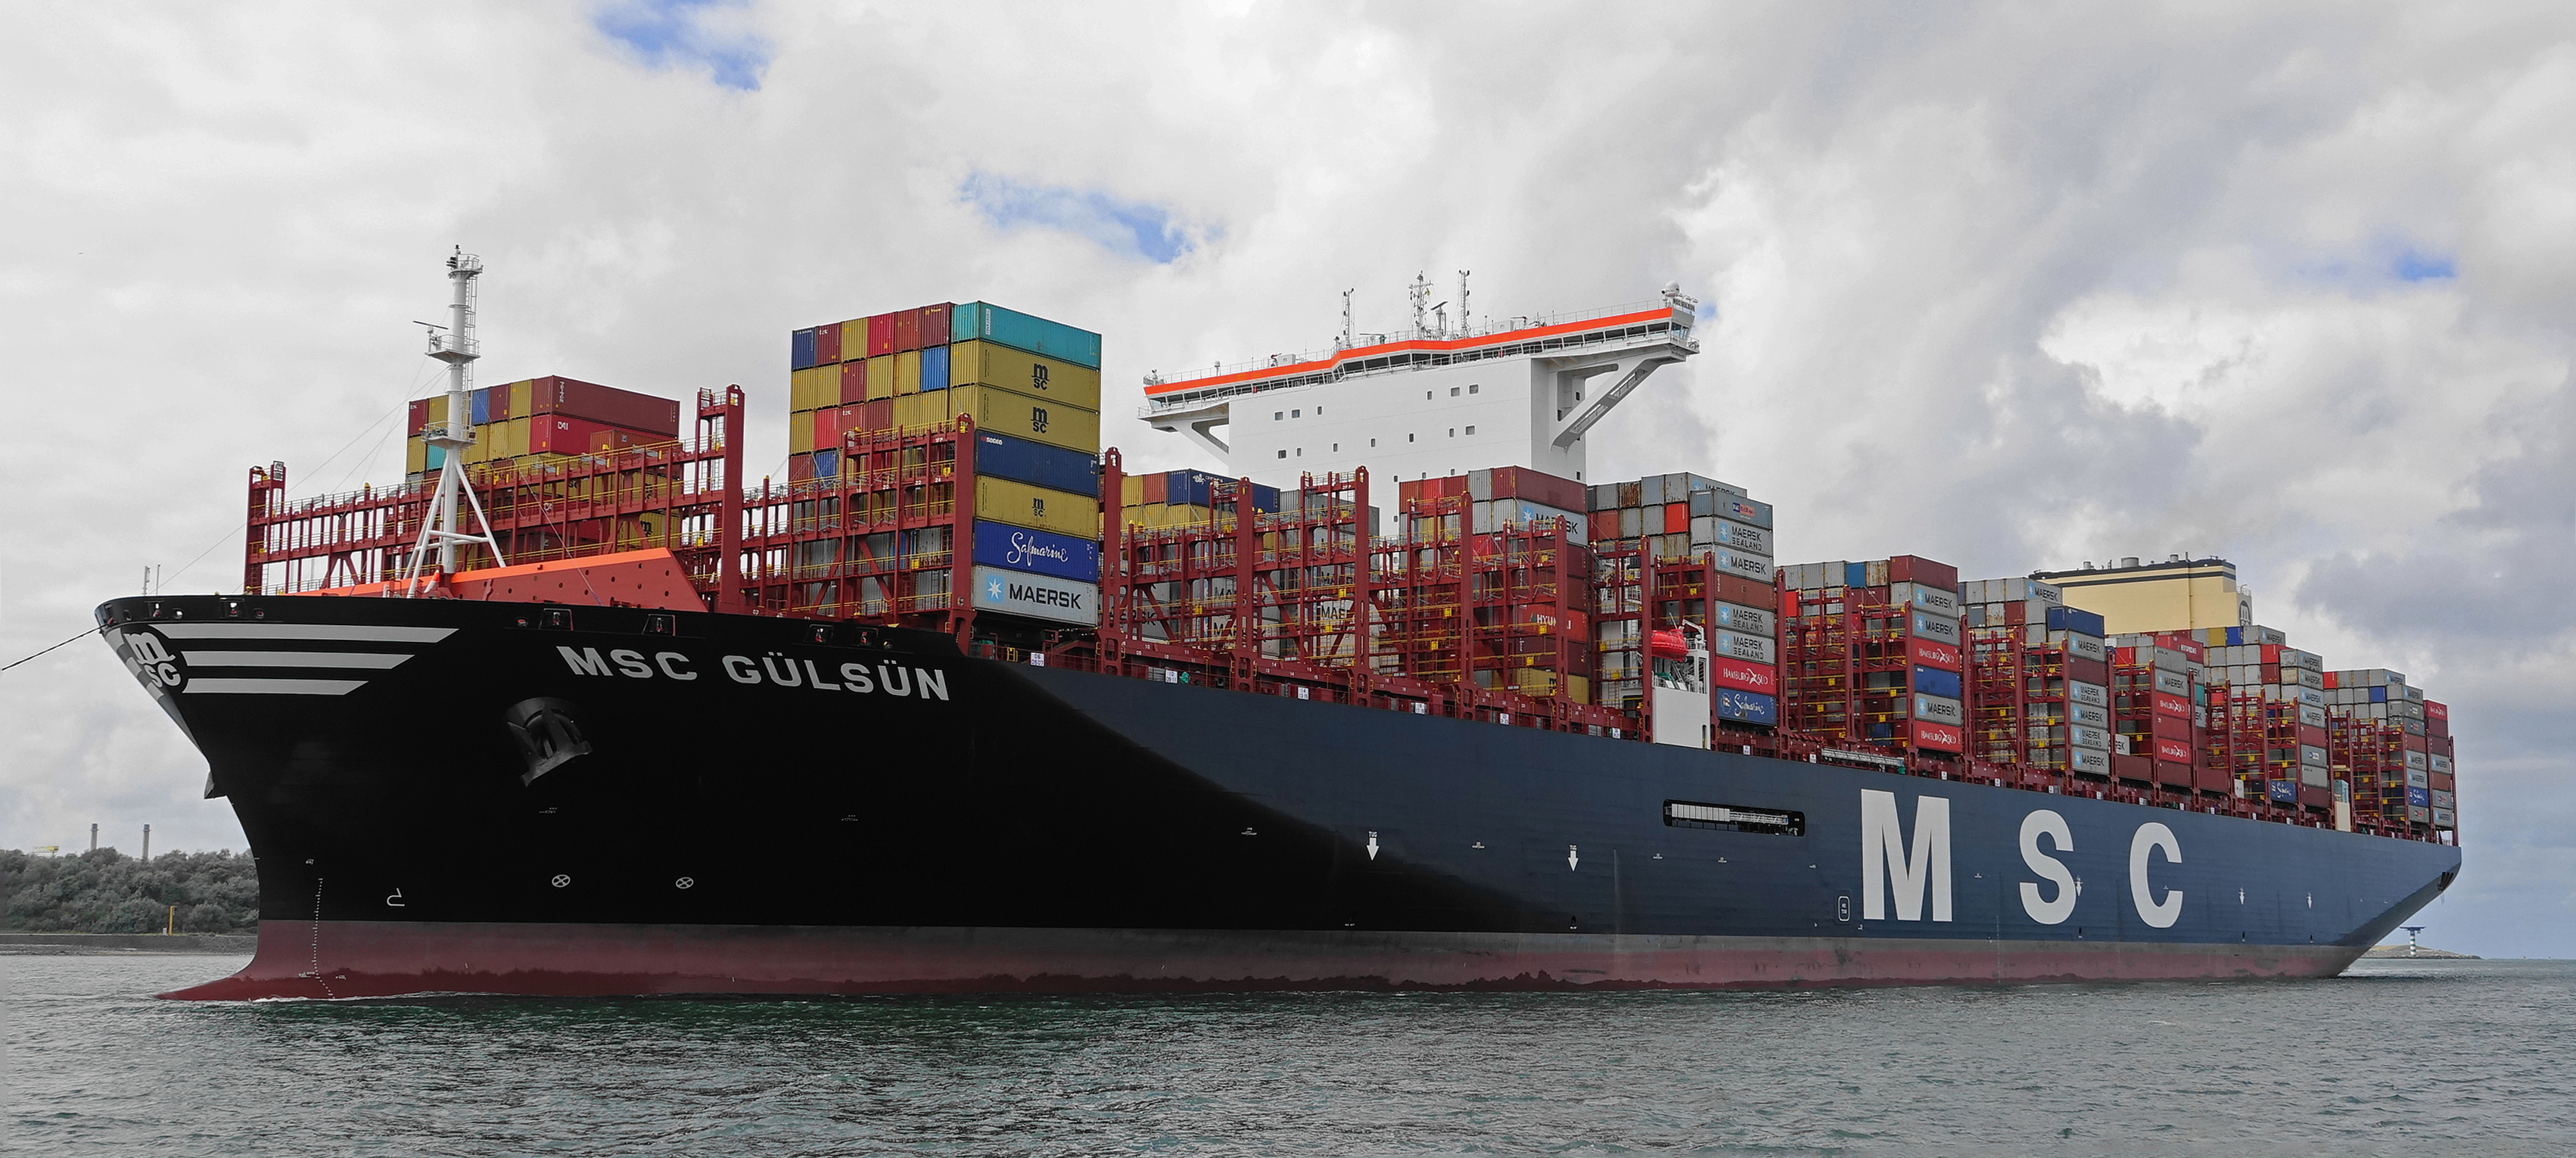 <p>When fully loaded, the MSC Gülsün can accommodate 23,756 shipping containers, and includes 2,000 refrigeration slots to ensure the safety of temperature-controlled goods.</p>